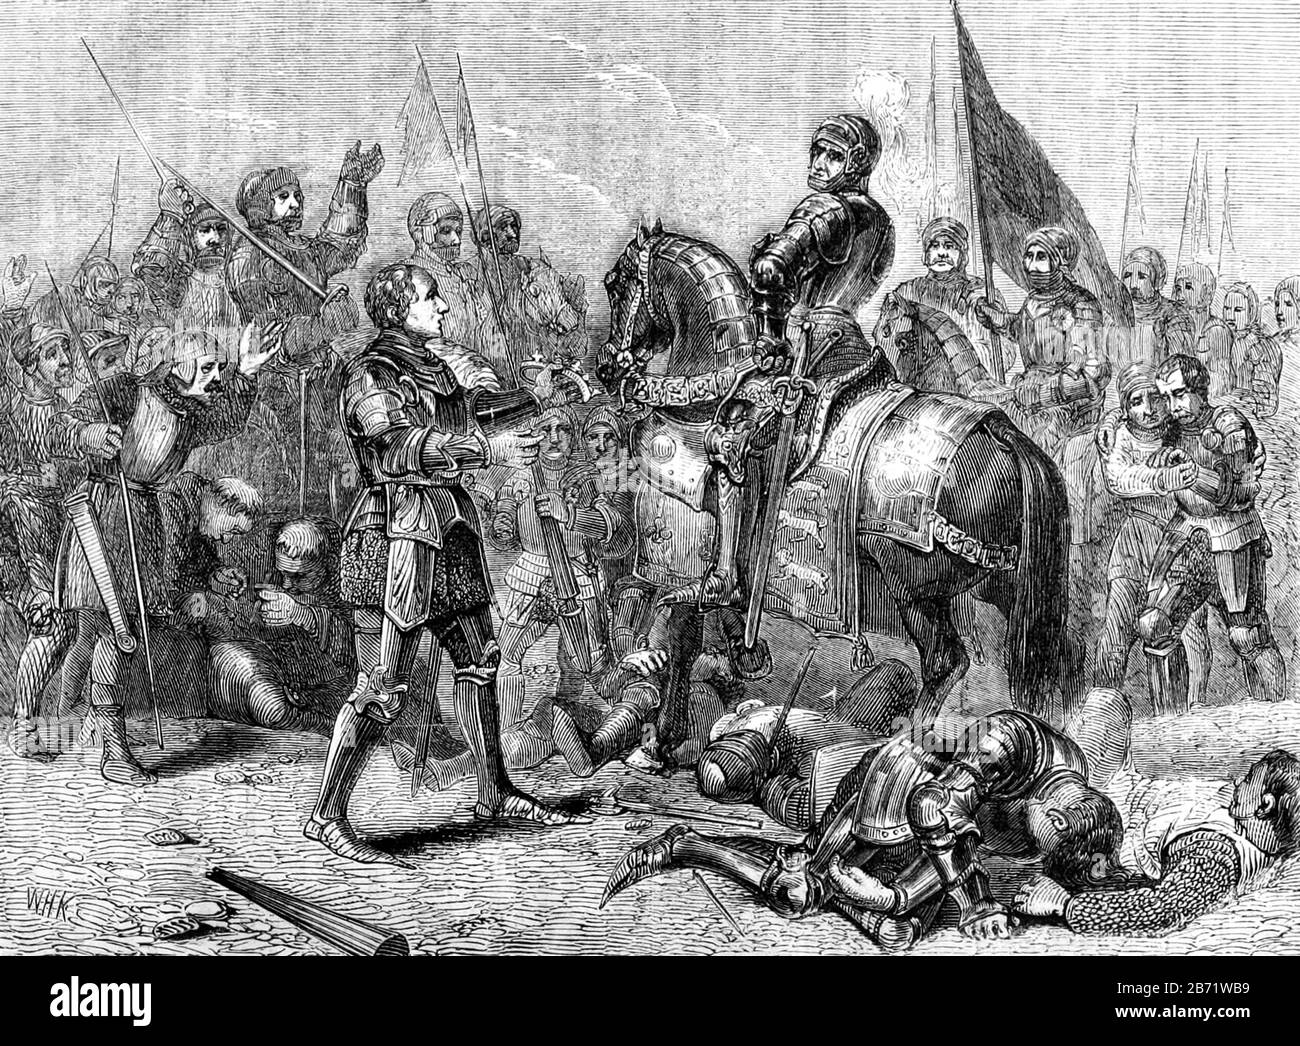 Battle of Bosworth Field. Lord Stanley Bringing the Crown of Richard to Richmond. Finding Richard's circlet after the battle, Lord Stanley hands it to Henry. Henry seized the crown by right of conquest. After the battle, Richard's circlet is said to have been found and brought to Henry, who was proclaimed king at the top of Crown Hill. The Battle of Bosworth Field (or Battle of Bosworth) was the last significant battle of the Wars of the Roses, the civil war between the Houses of Lancaster and York that extended across England in the latter half of the 15th century Stock Photo